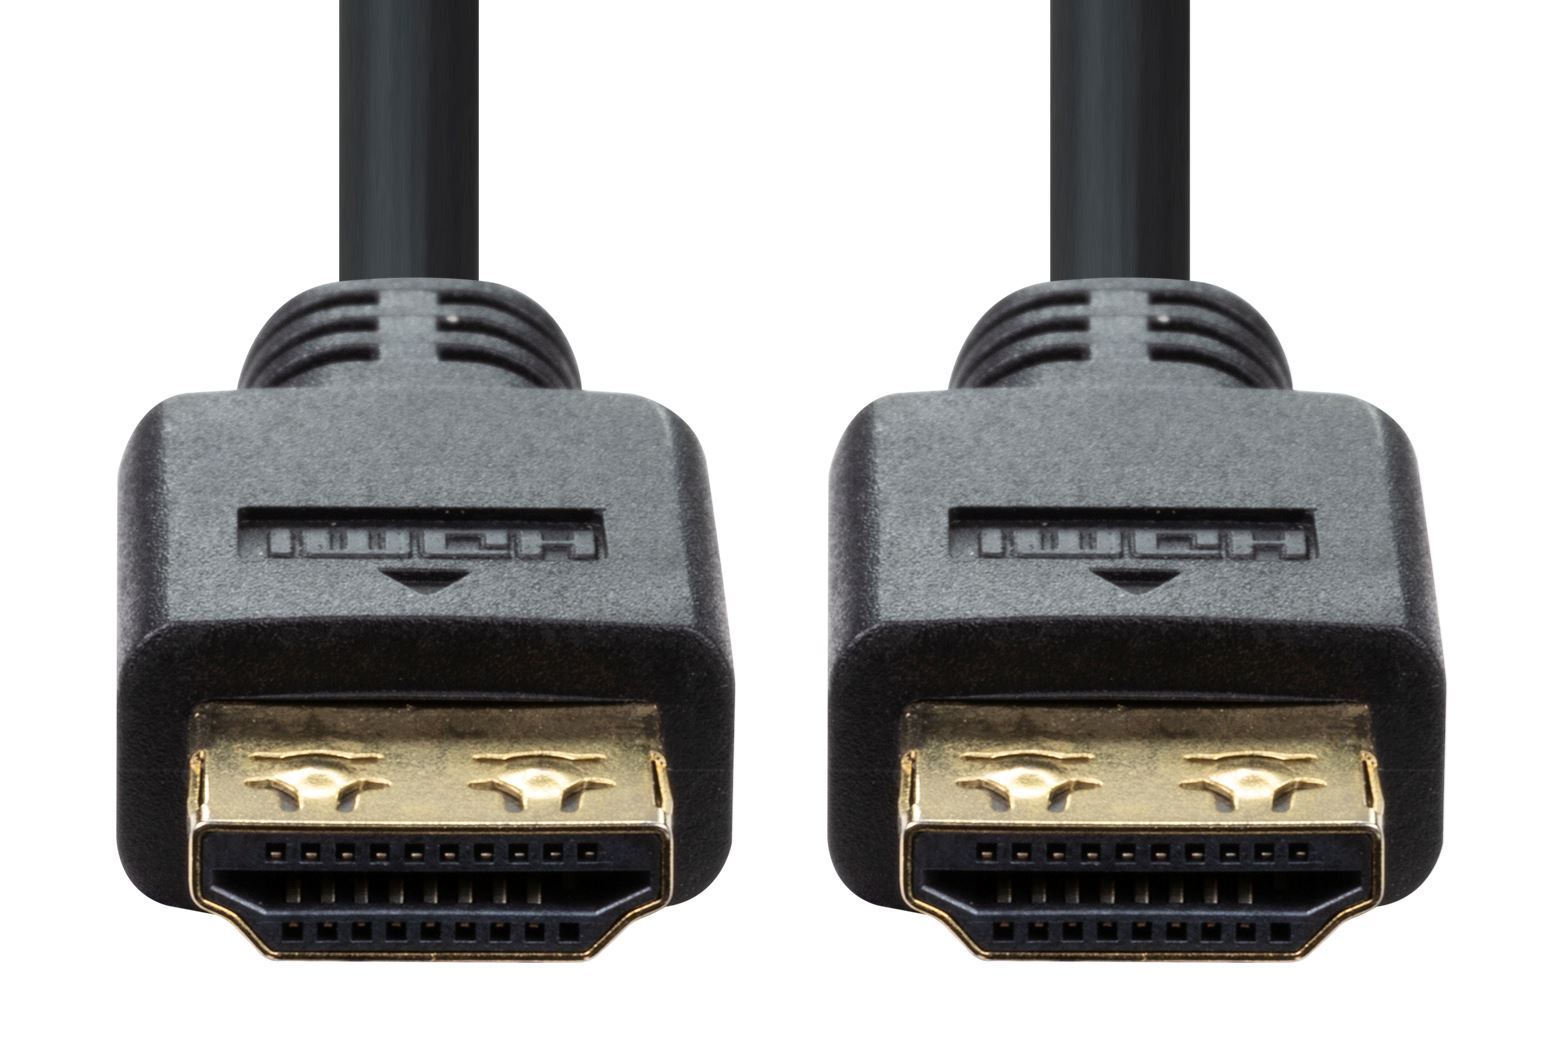 DYNAMIX_15M_HDMI_High_Speed_Flexi_Lock_Cable_with_Ethernet._Max_Res:_4K2K@30Hz._Supports_ARC_and_3D. 724